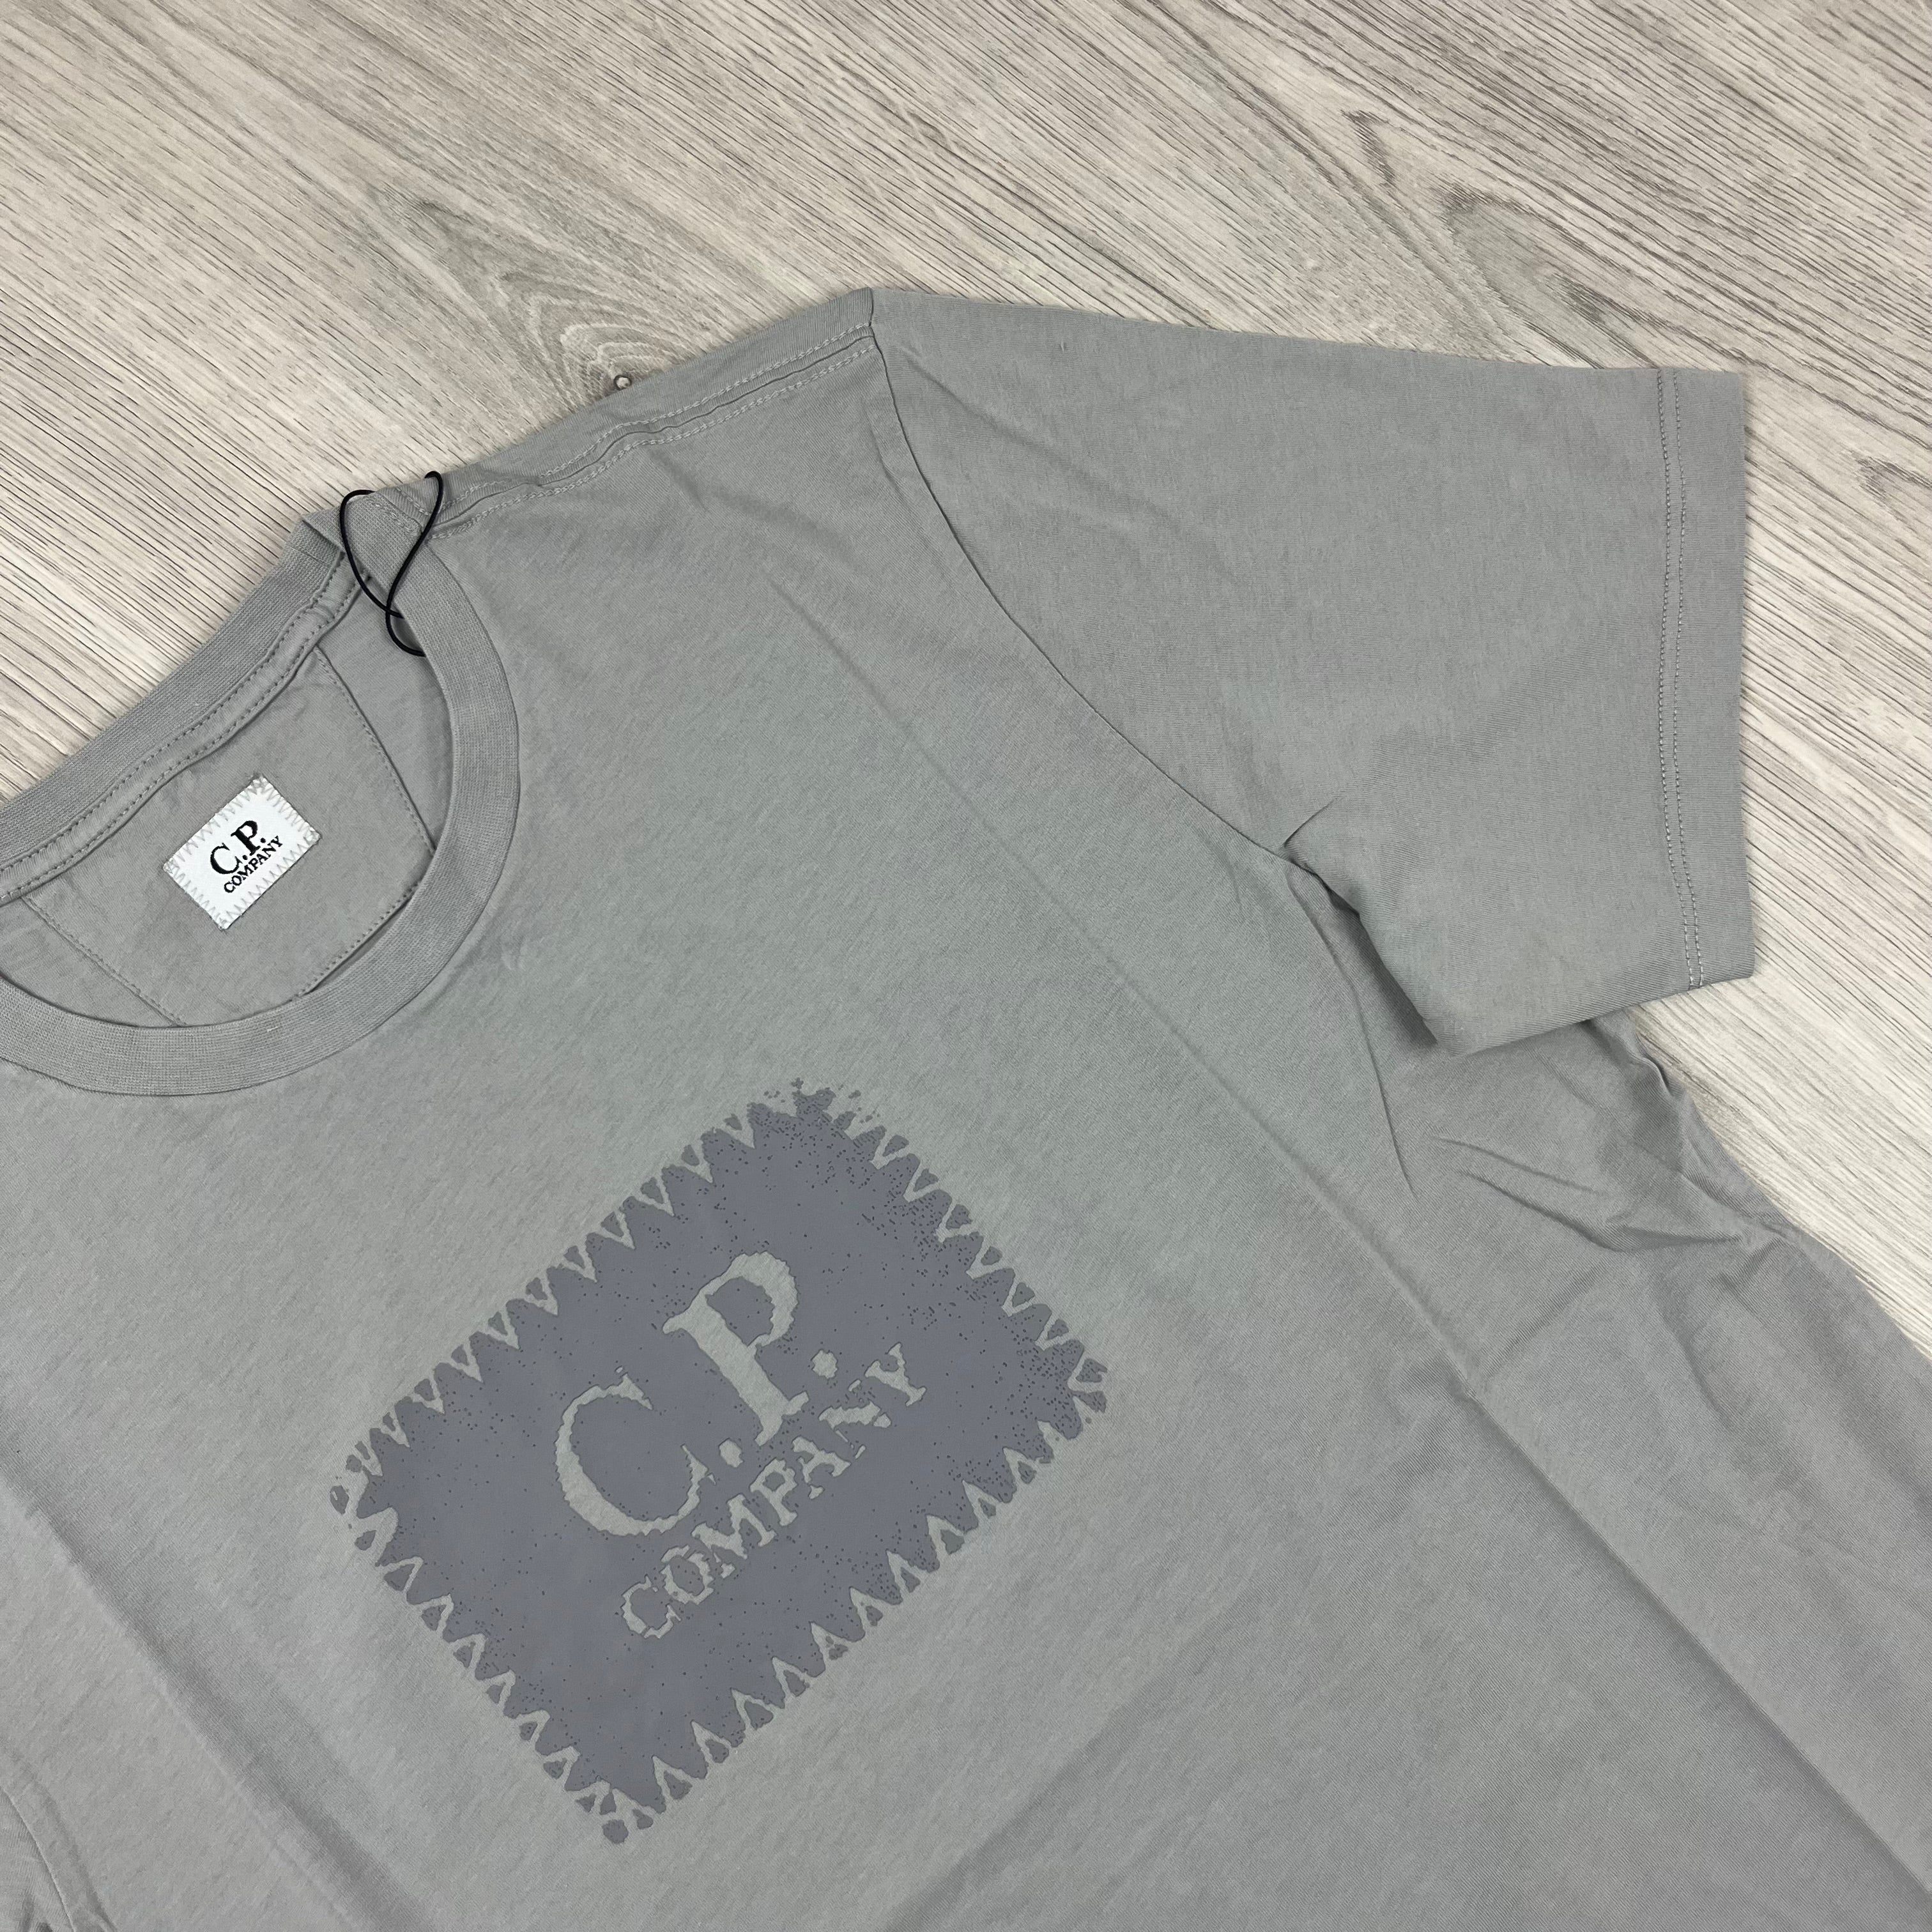 CP Company Stamp T-Shirt